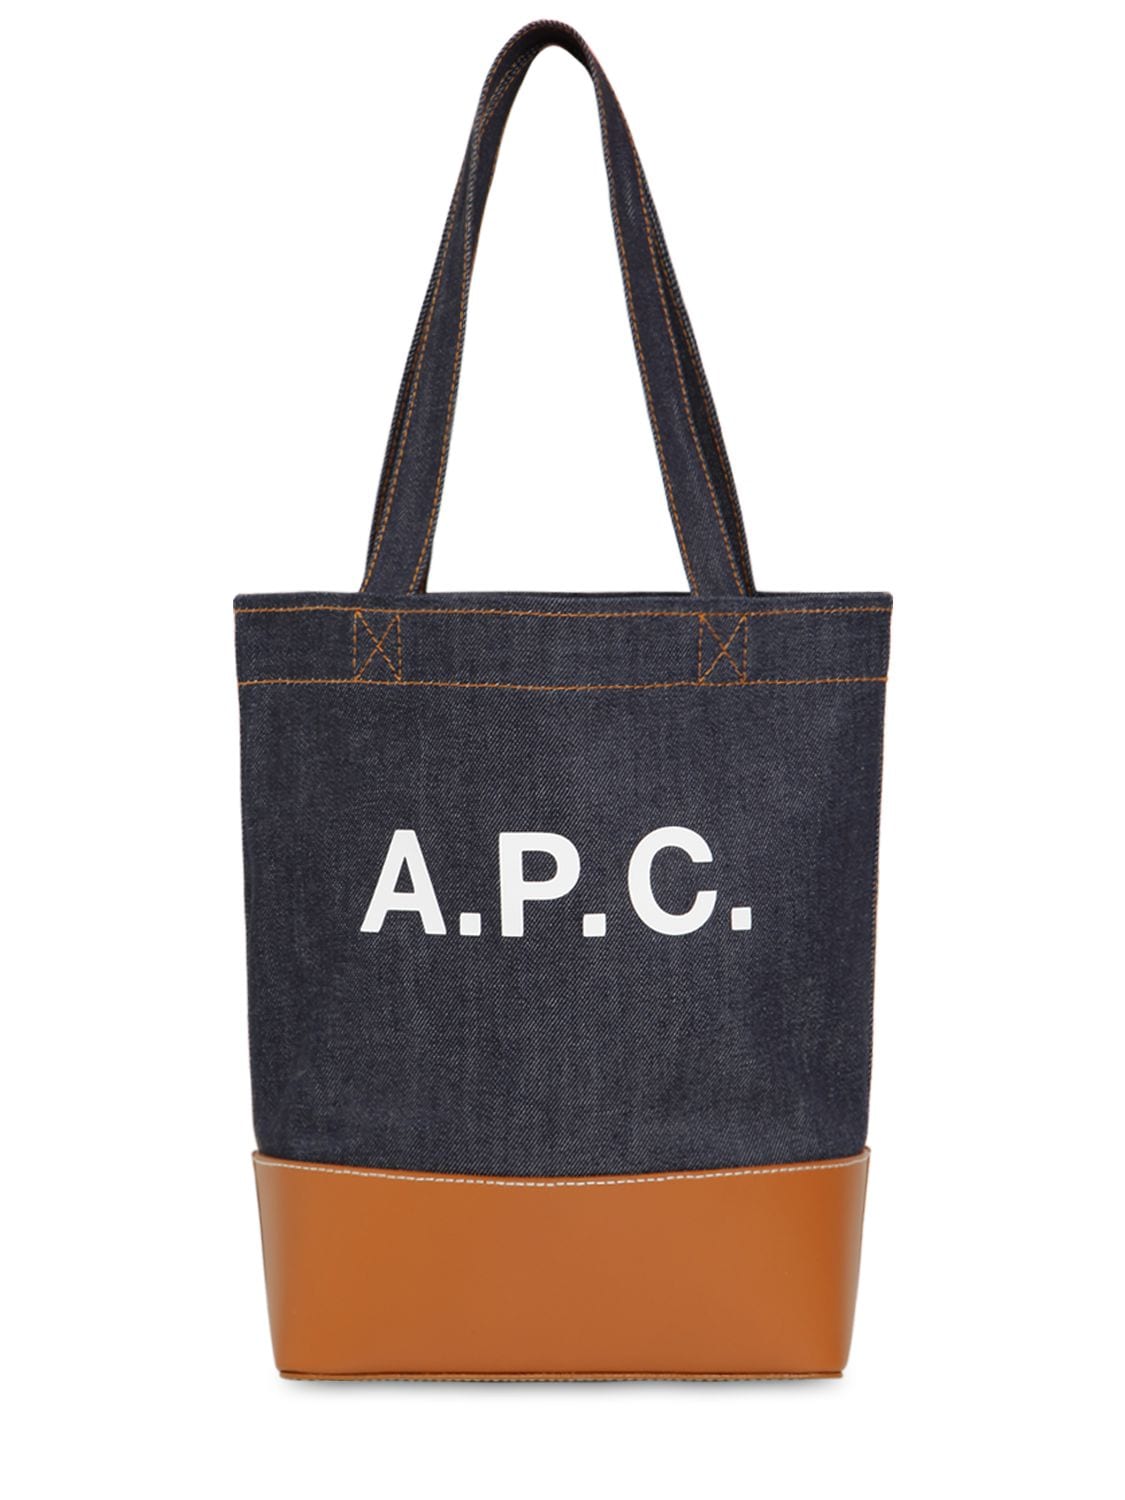 A.p.c. Axelle Tote Bag In Caramel